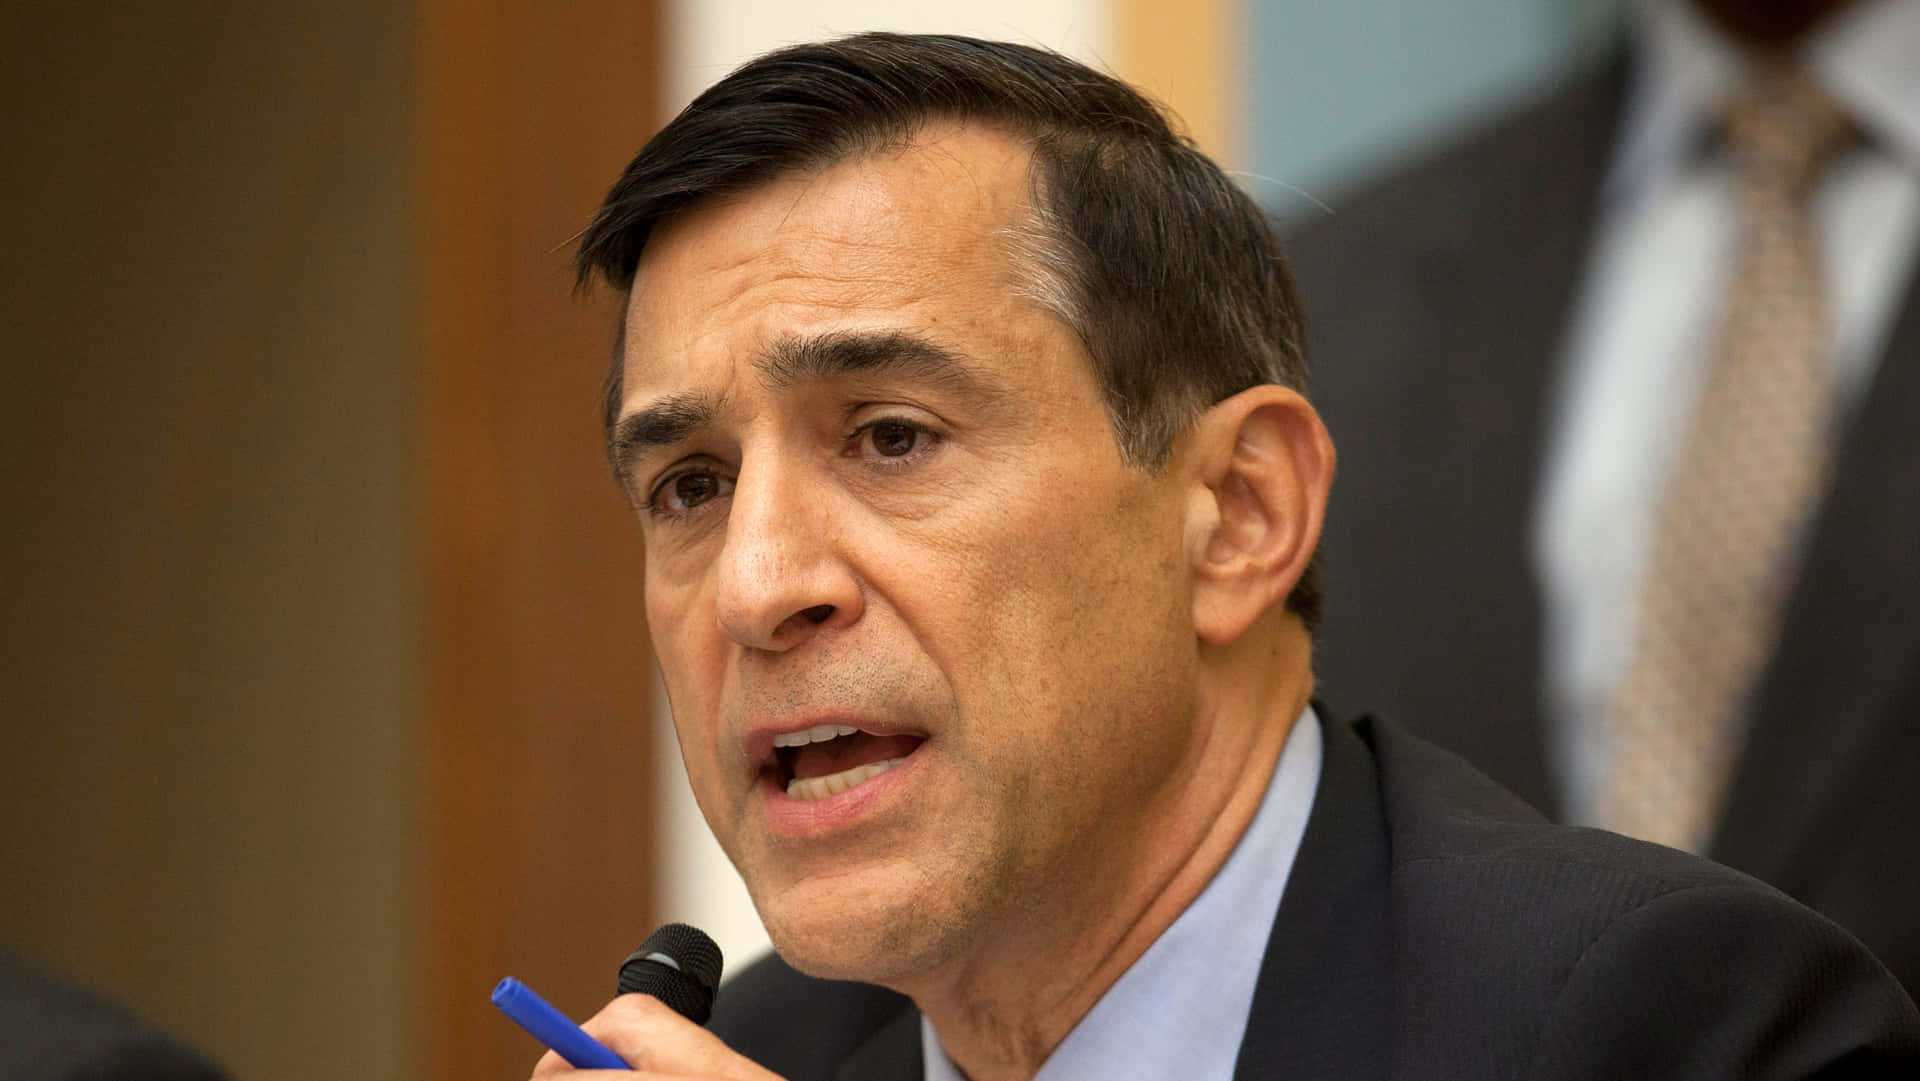 Darrell Issa - Speaking at a Public Event Wallpaper